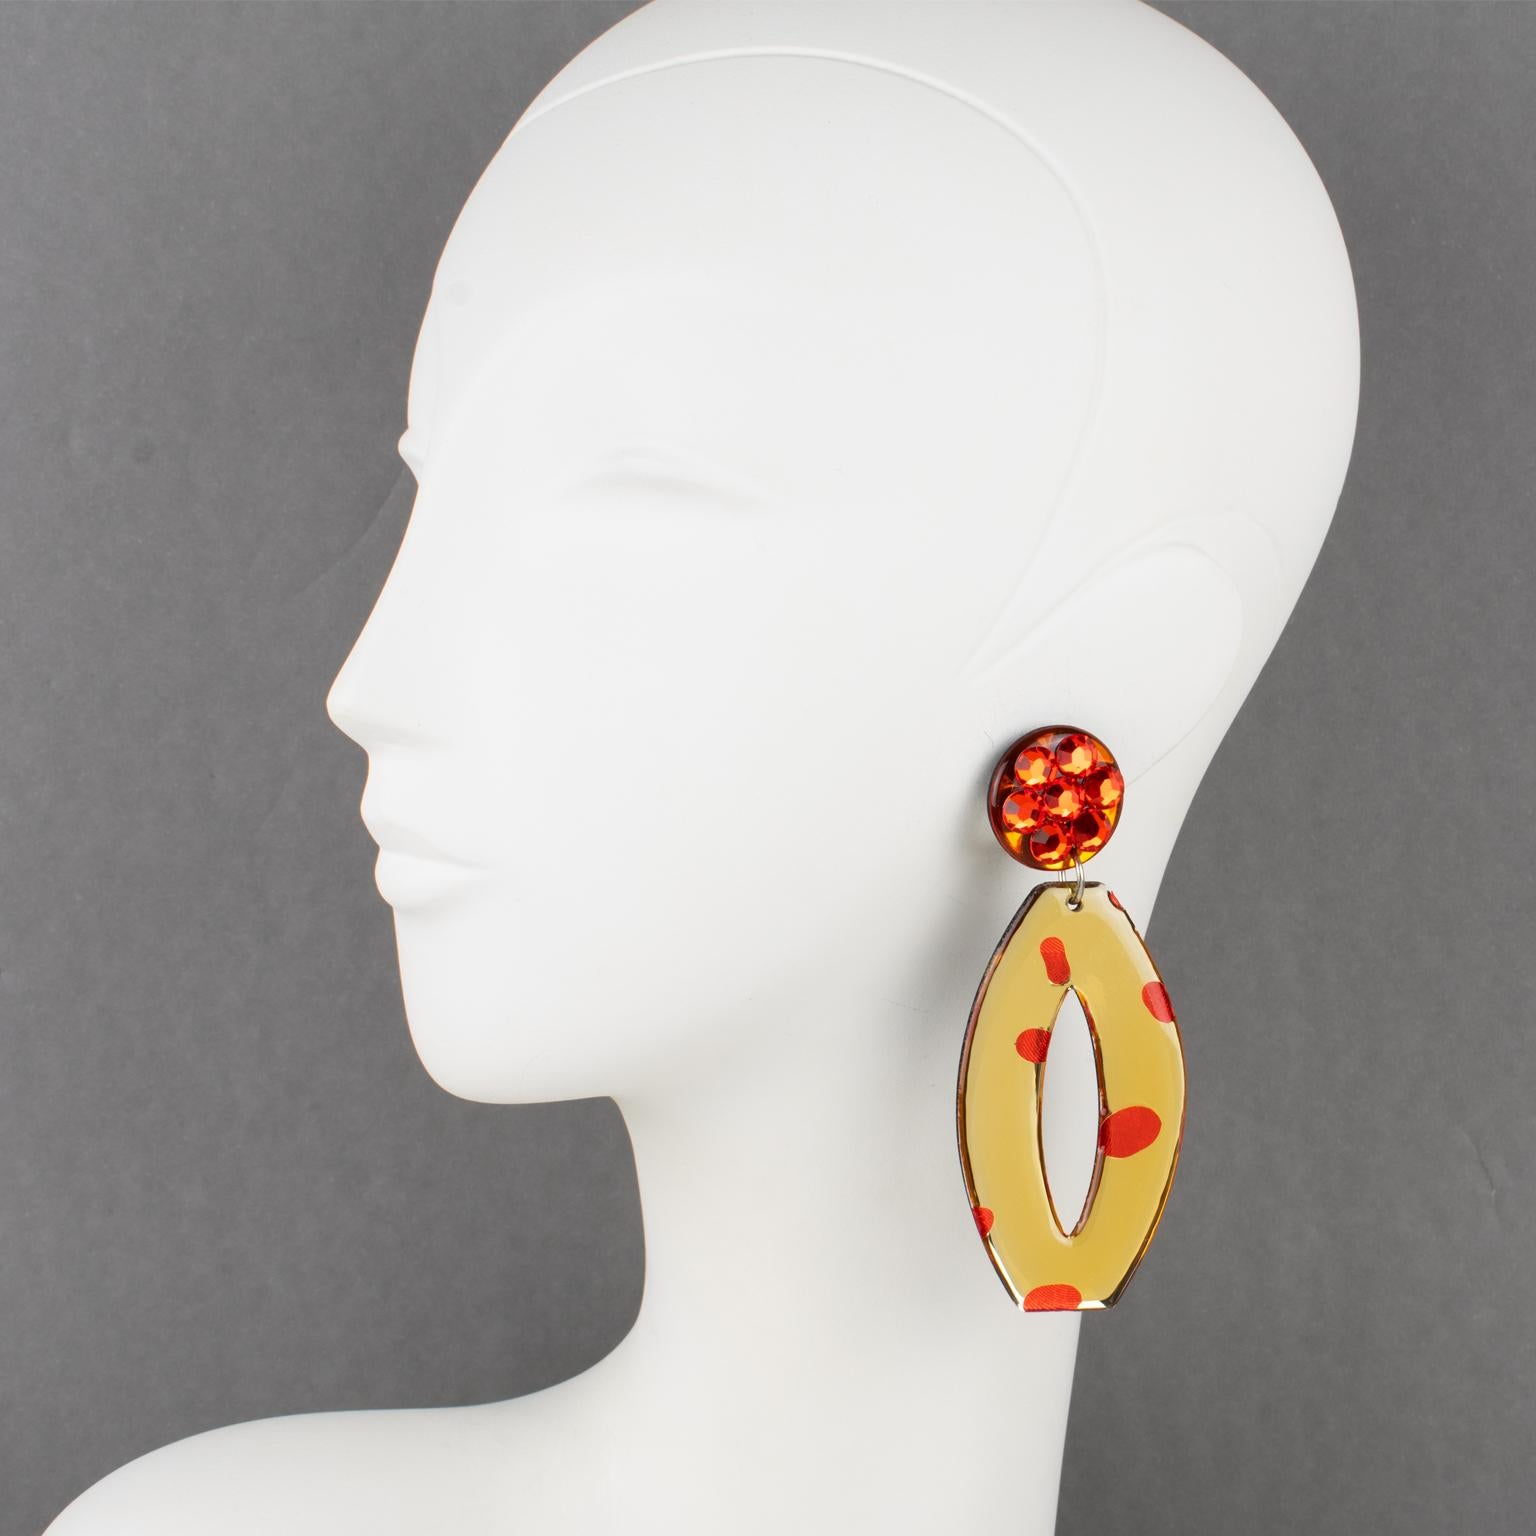 Fabulous Italian designer studio Lucite dangling clip-on earrings. Chandelier shape with geometric elongated donut design in yellow champagne and neon orange colors with mirror texture effect. Clip fittings are all paved with burnt orange crystal